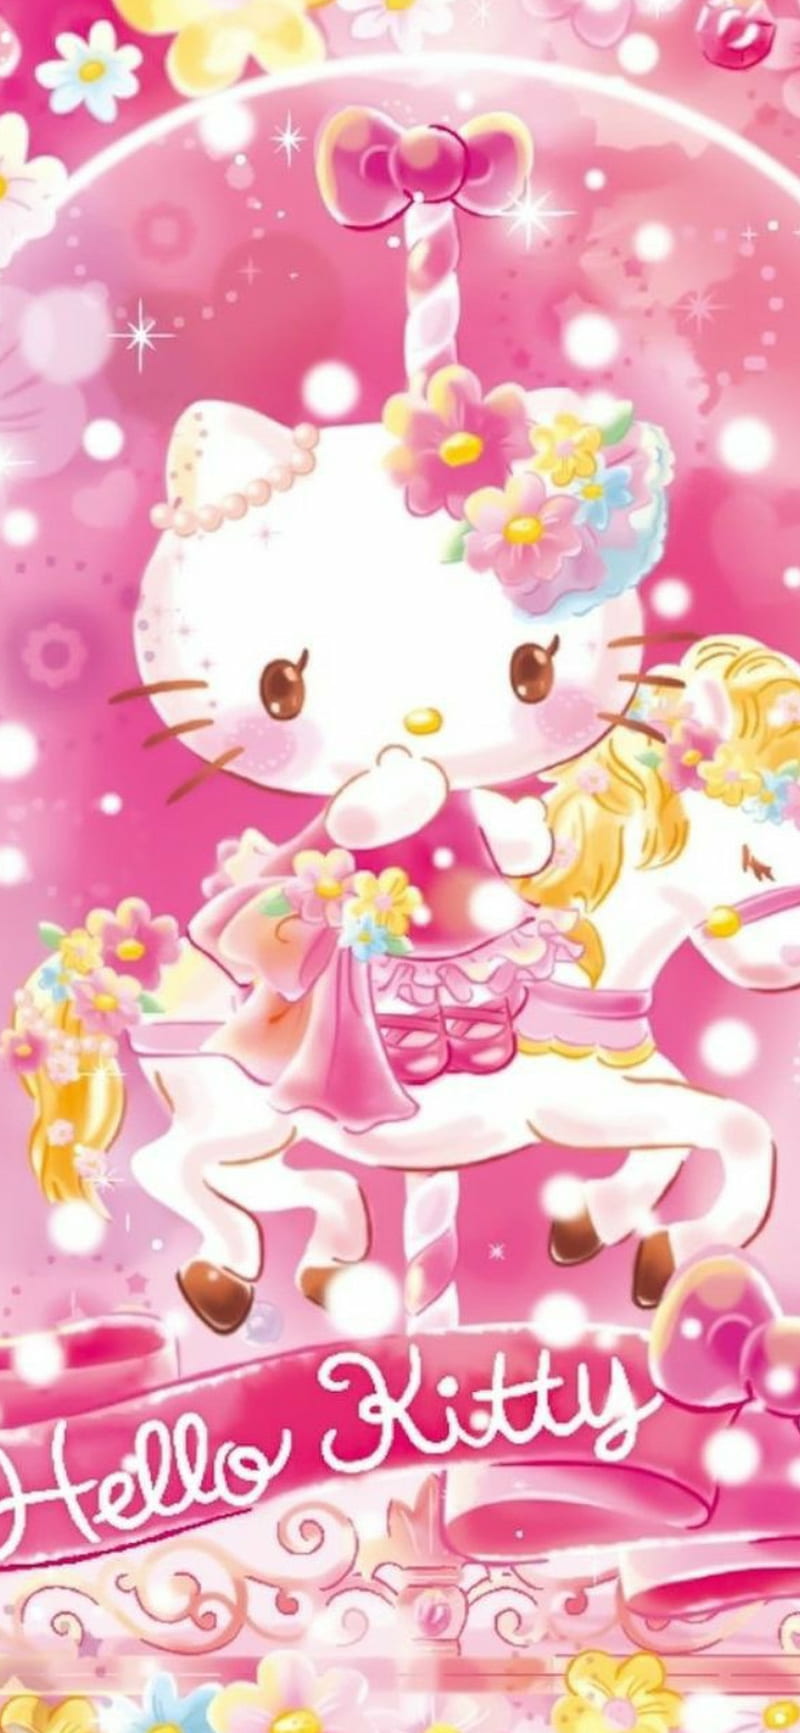 HD hello kitty pink wallpapers